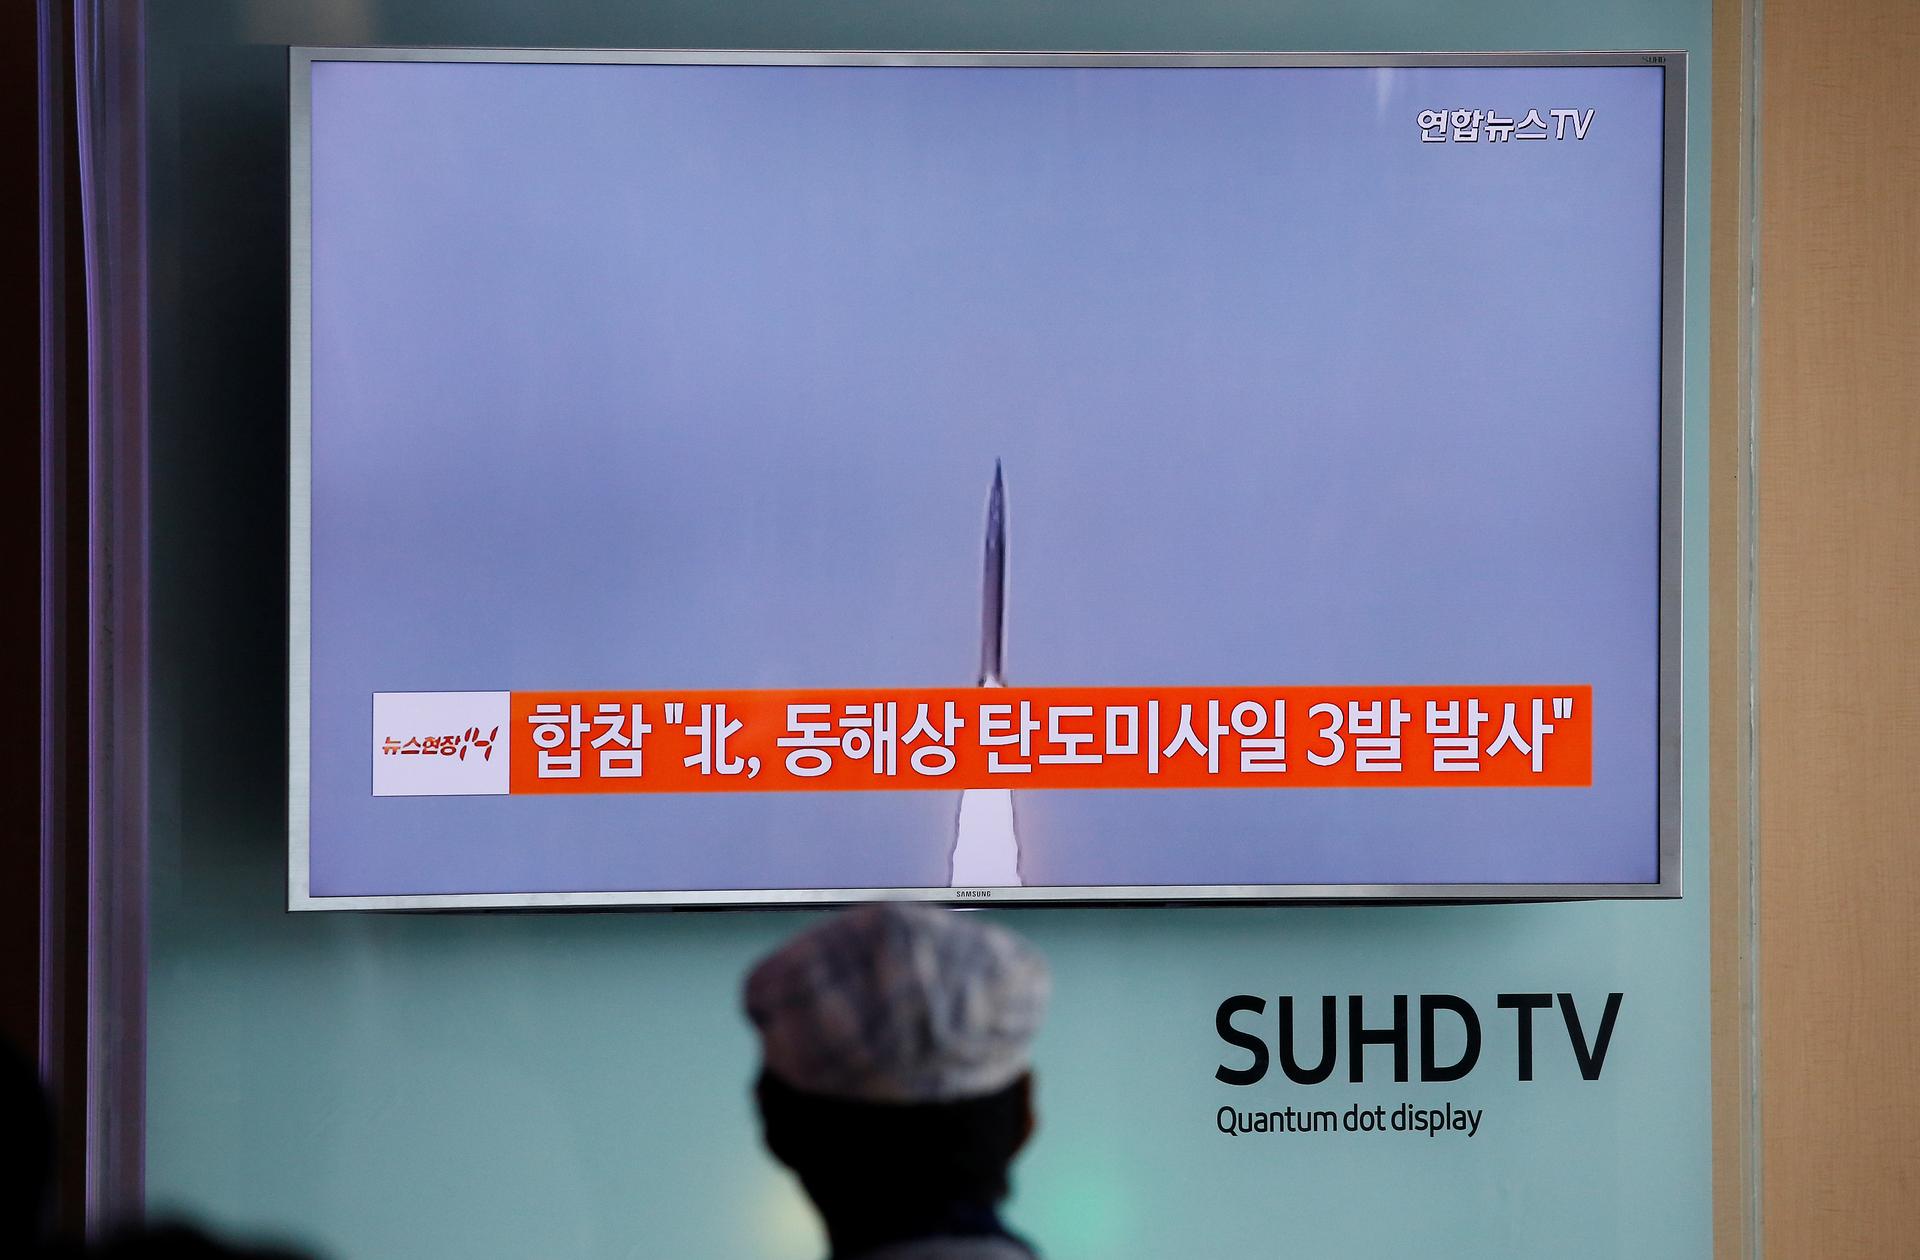 A passenger watches a TV screen broadcasting a news report on North Korea